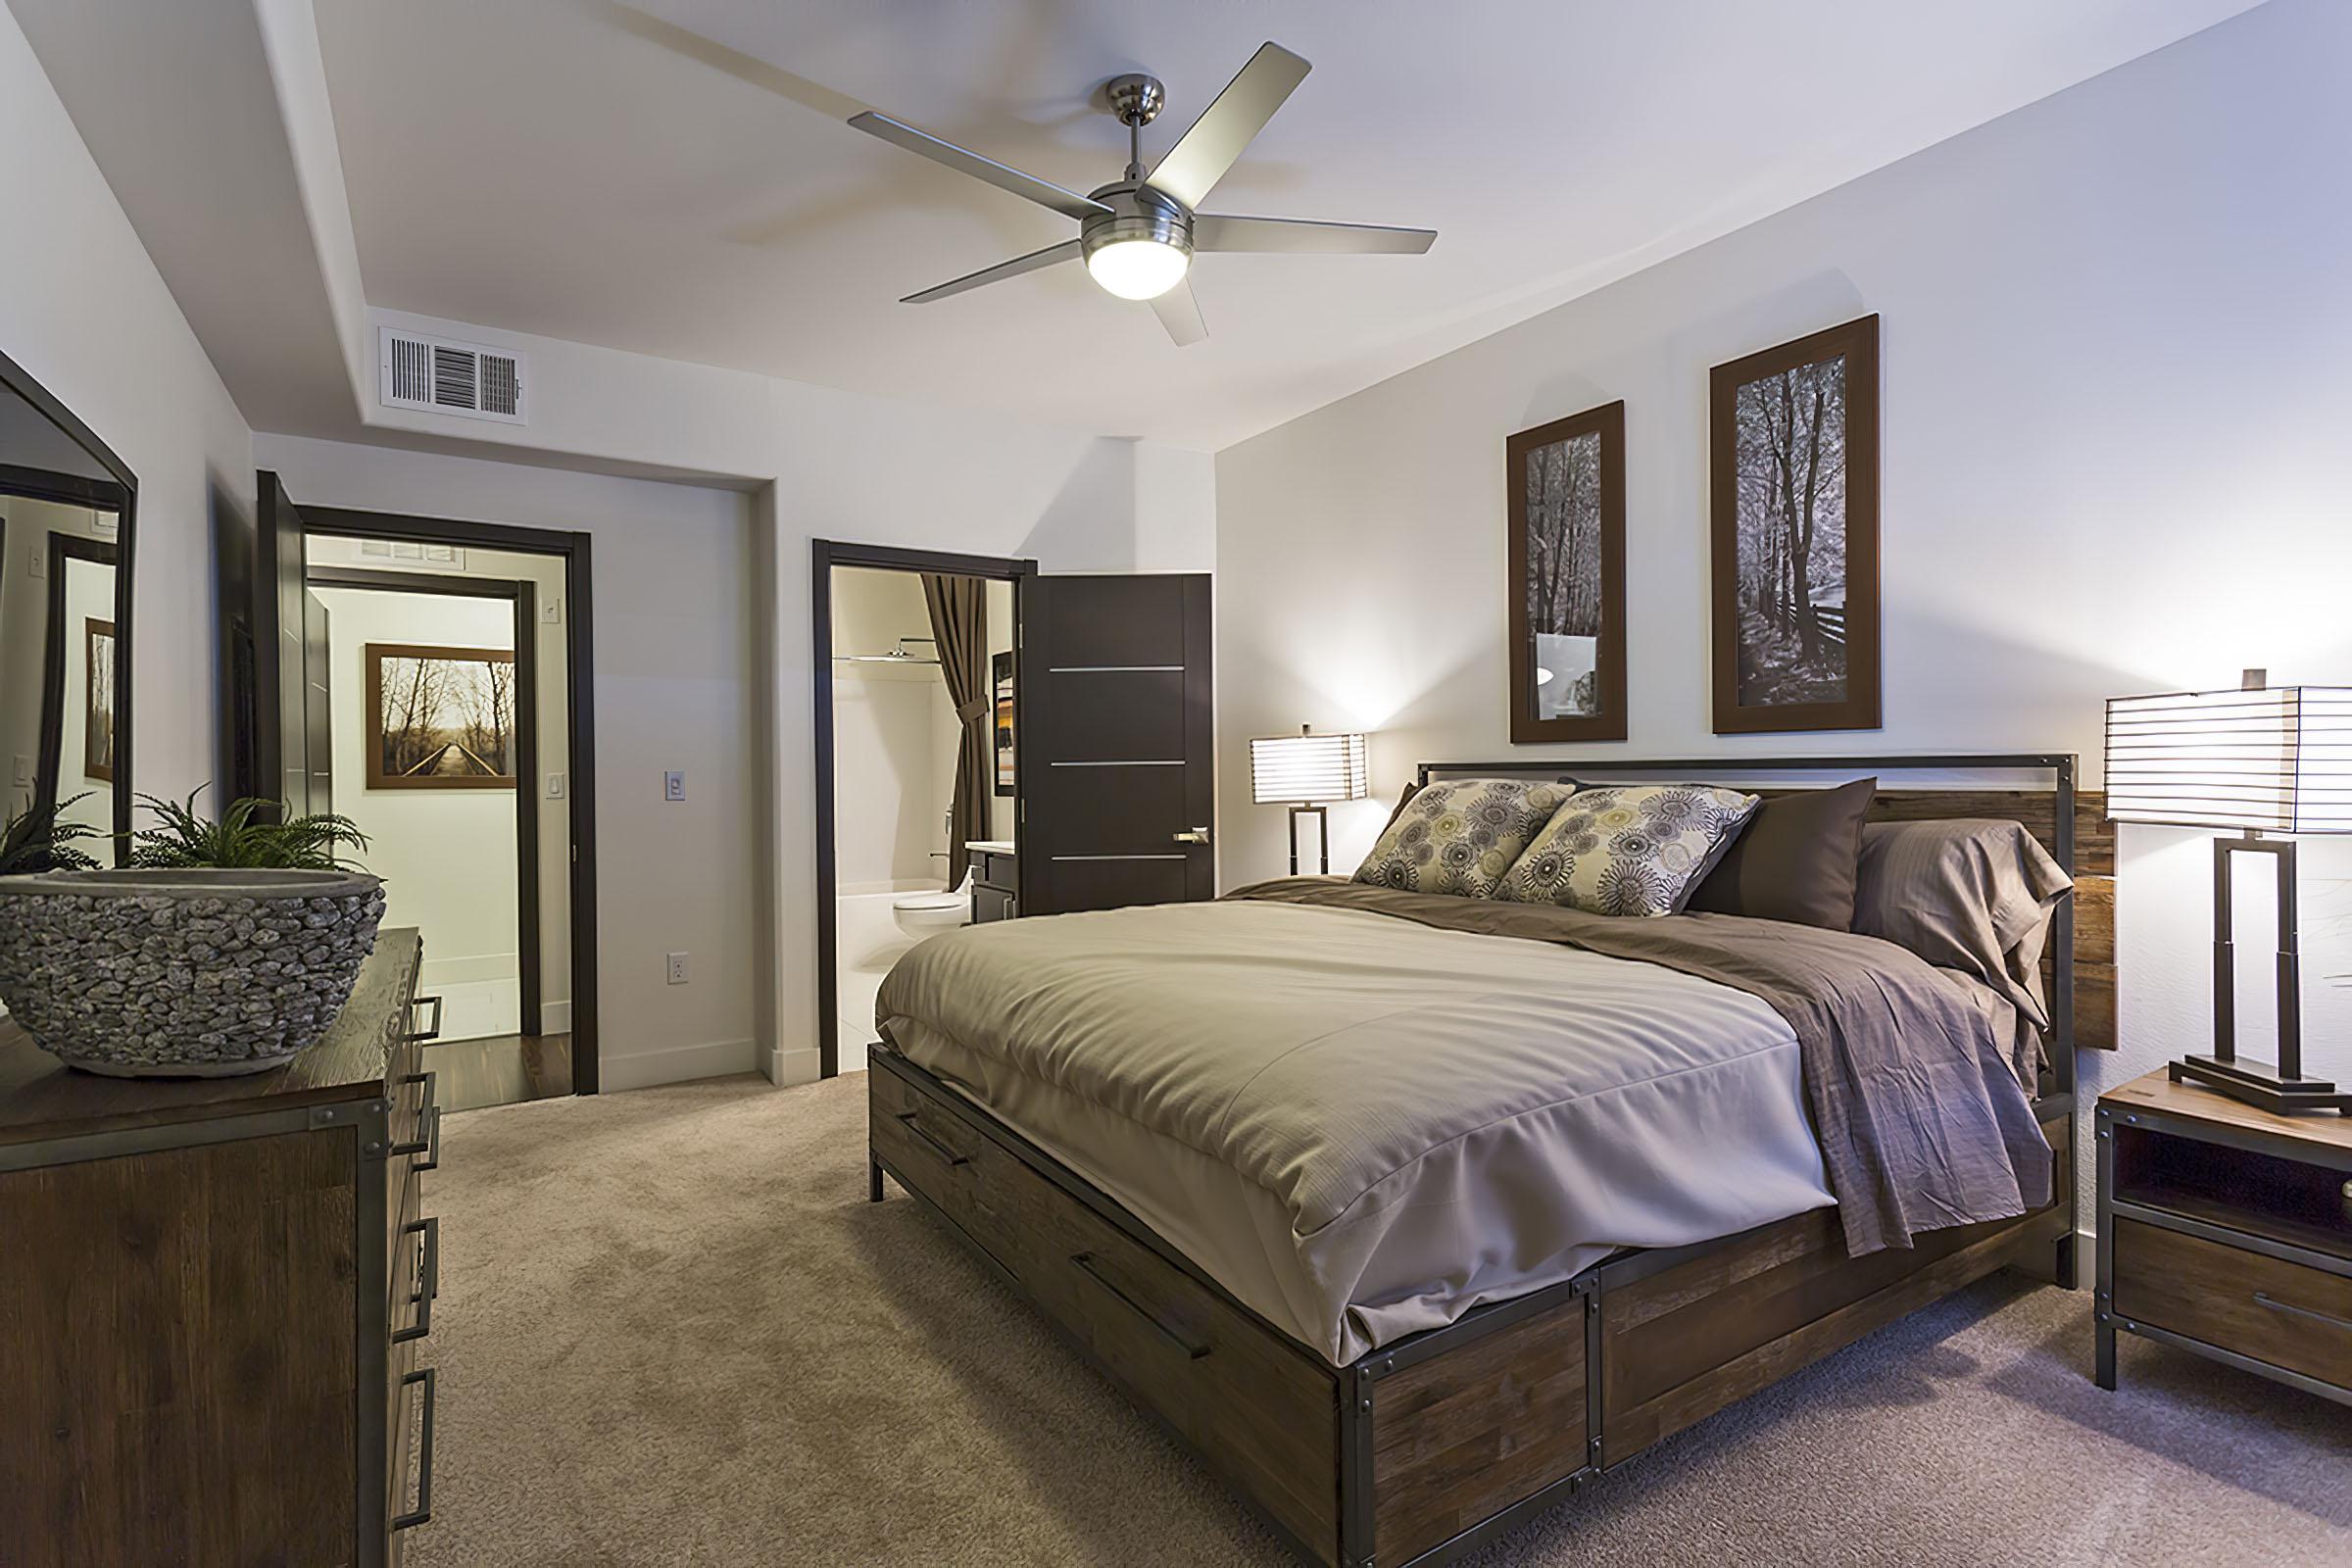 SPACIOUS BEDROOM WITH ENERGY-SAVING CEILING FAN